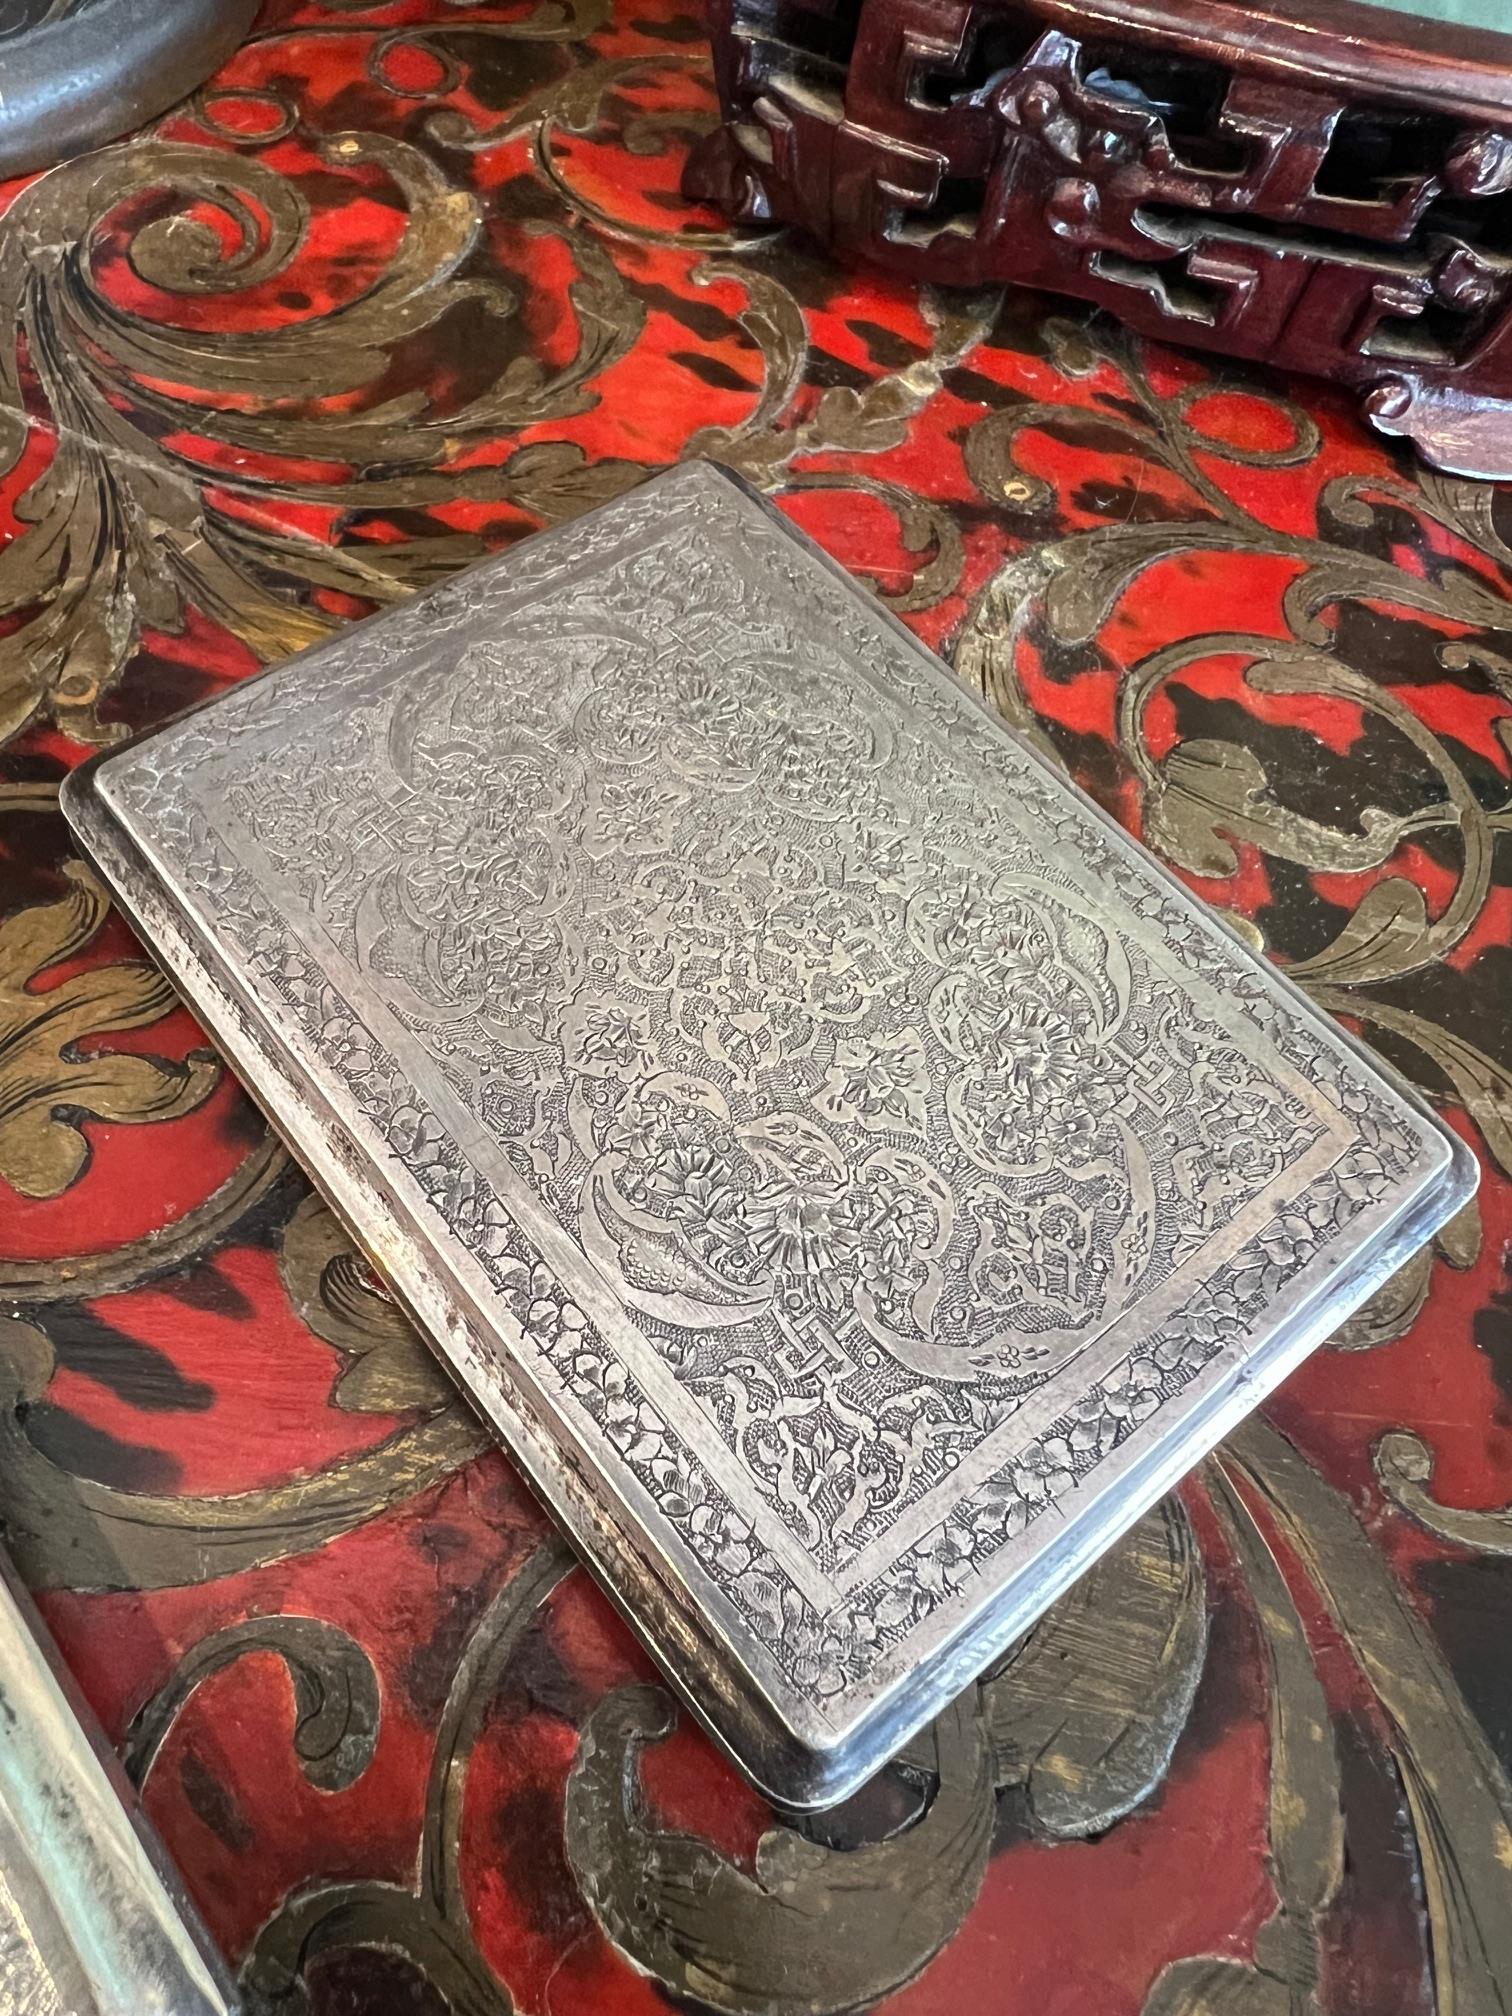 TWO PERSIAN SILVER CIGARETTE CASES - Image 3 of 4